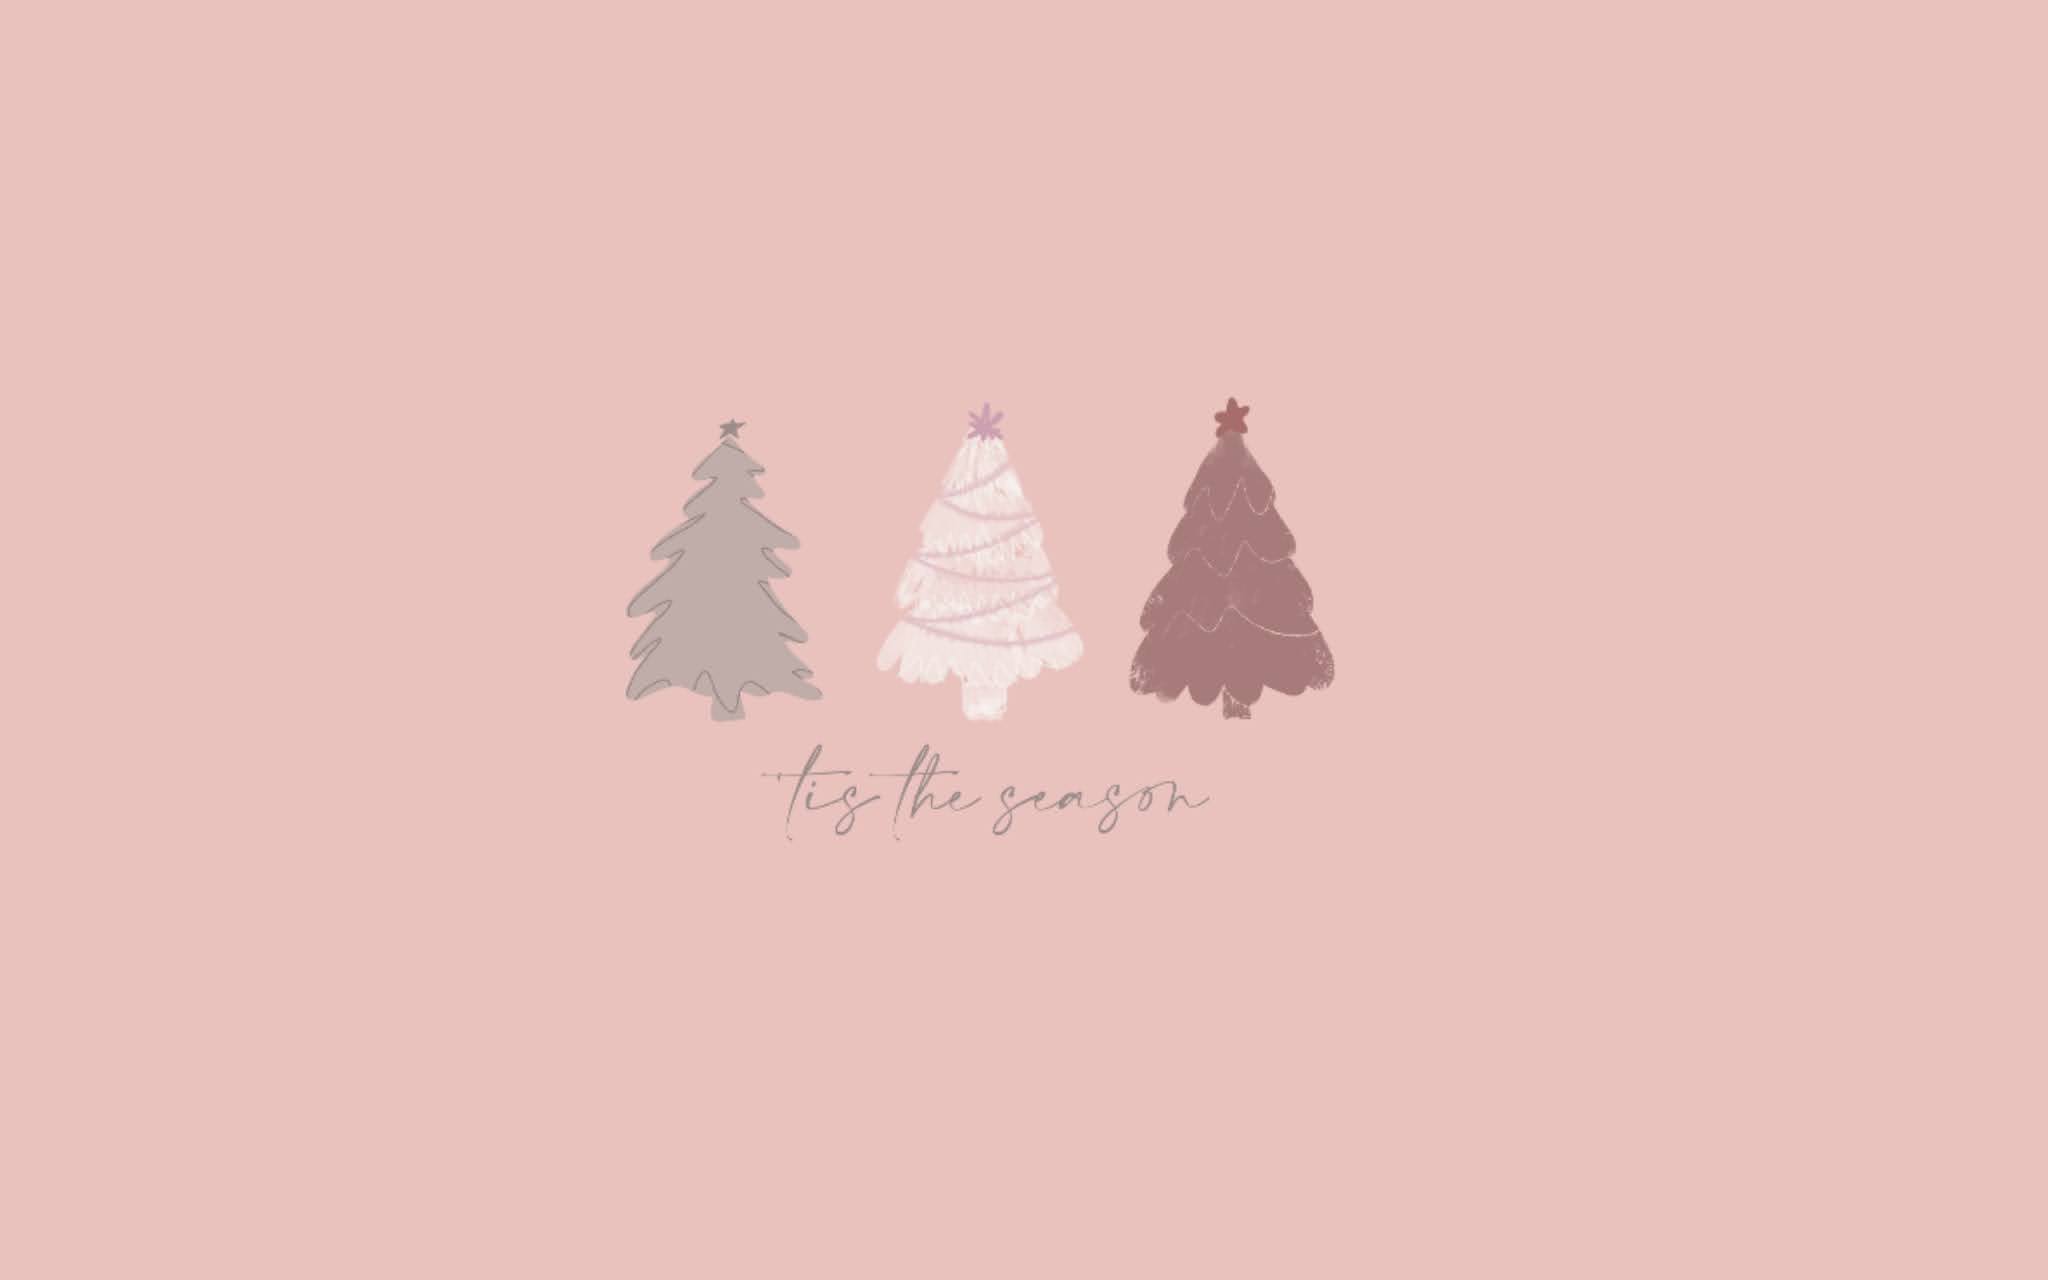 A pink background with three christmas trees - December